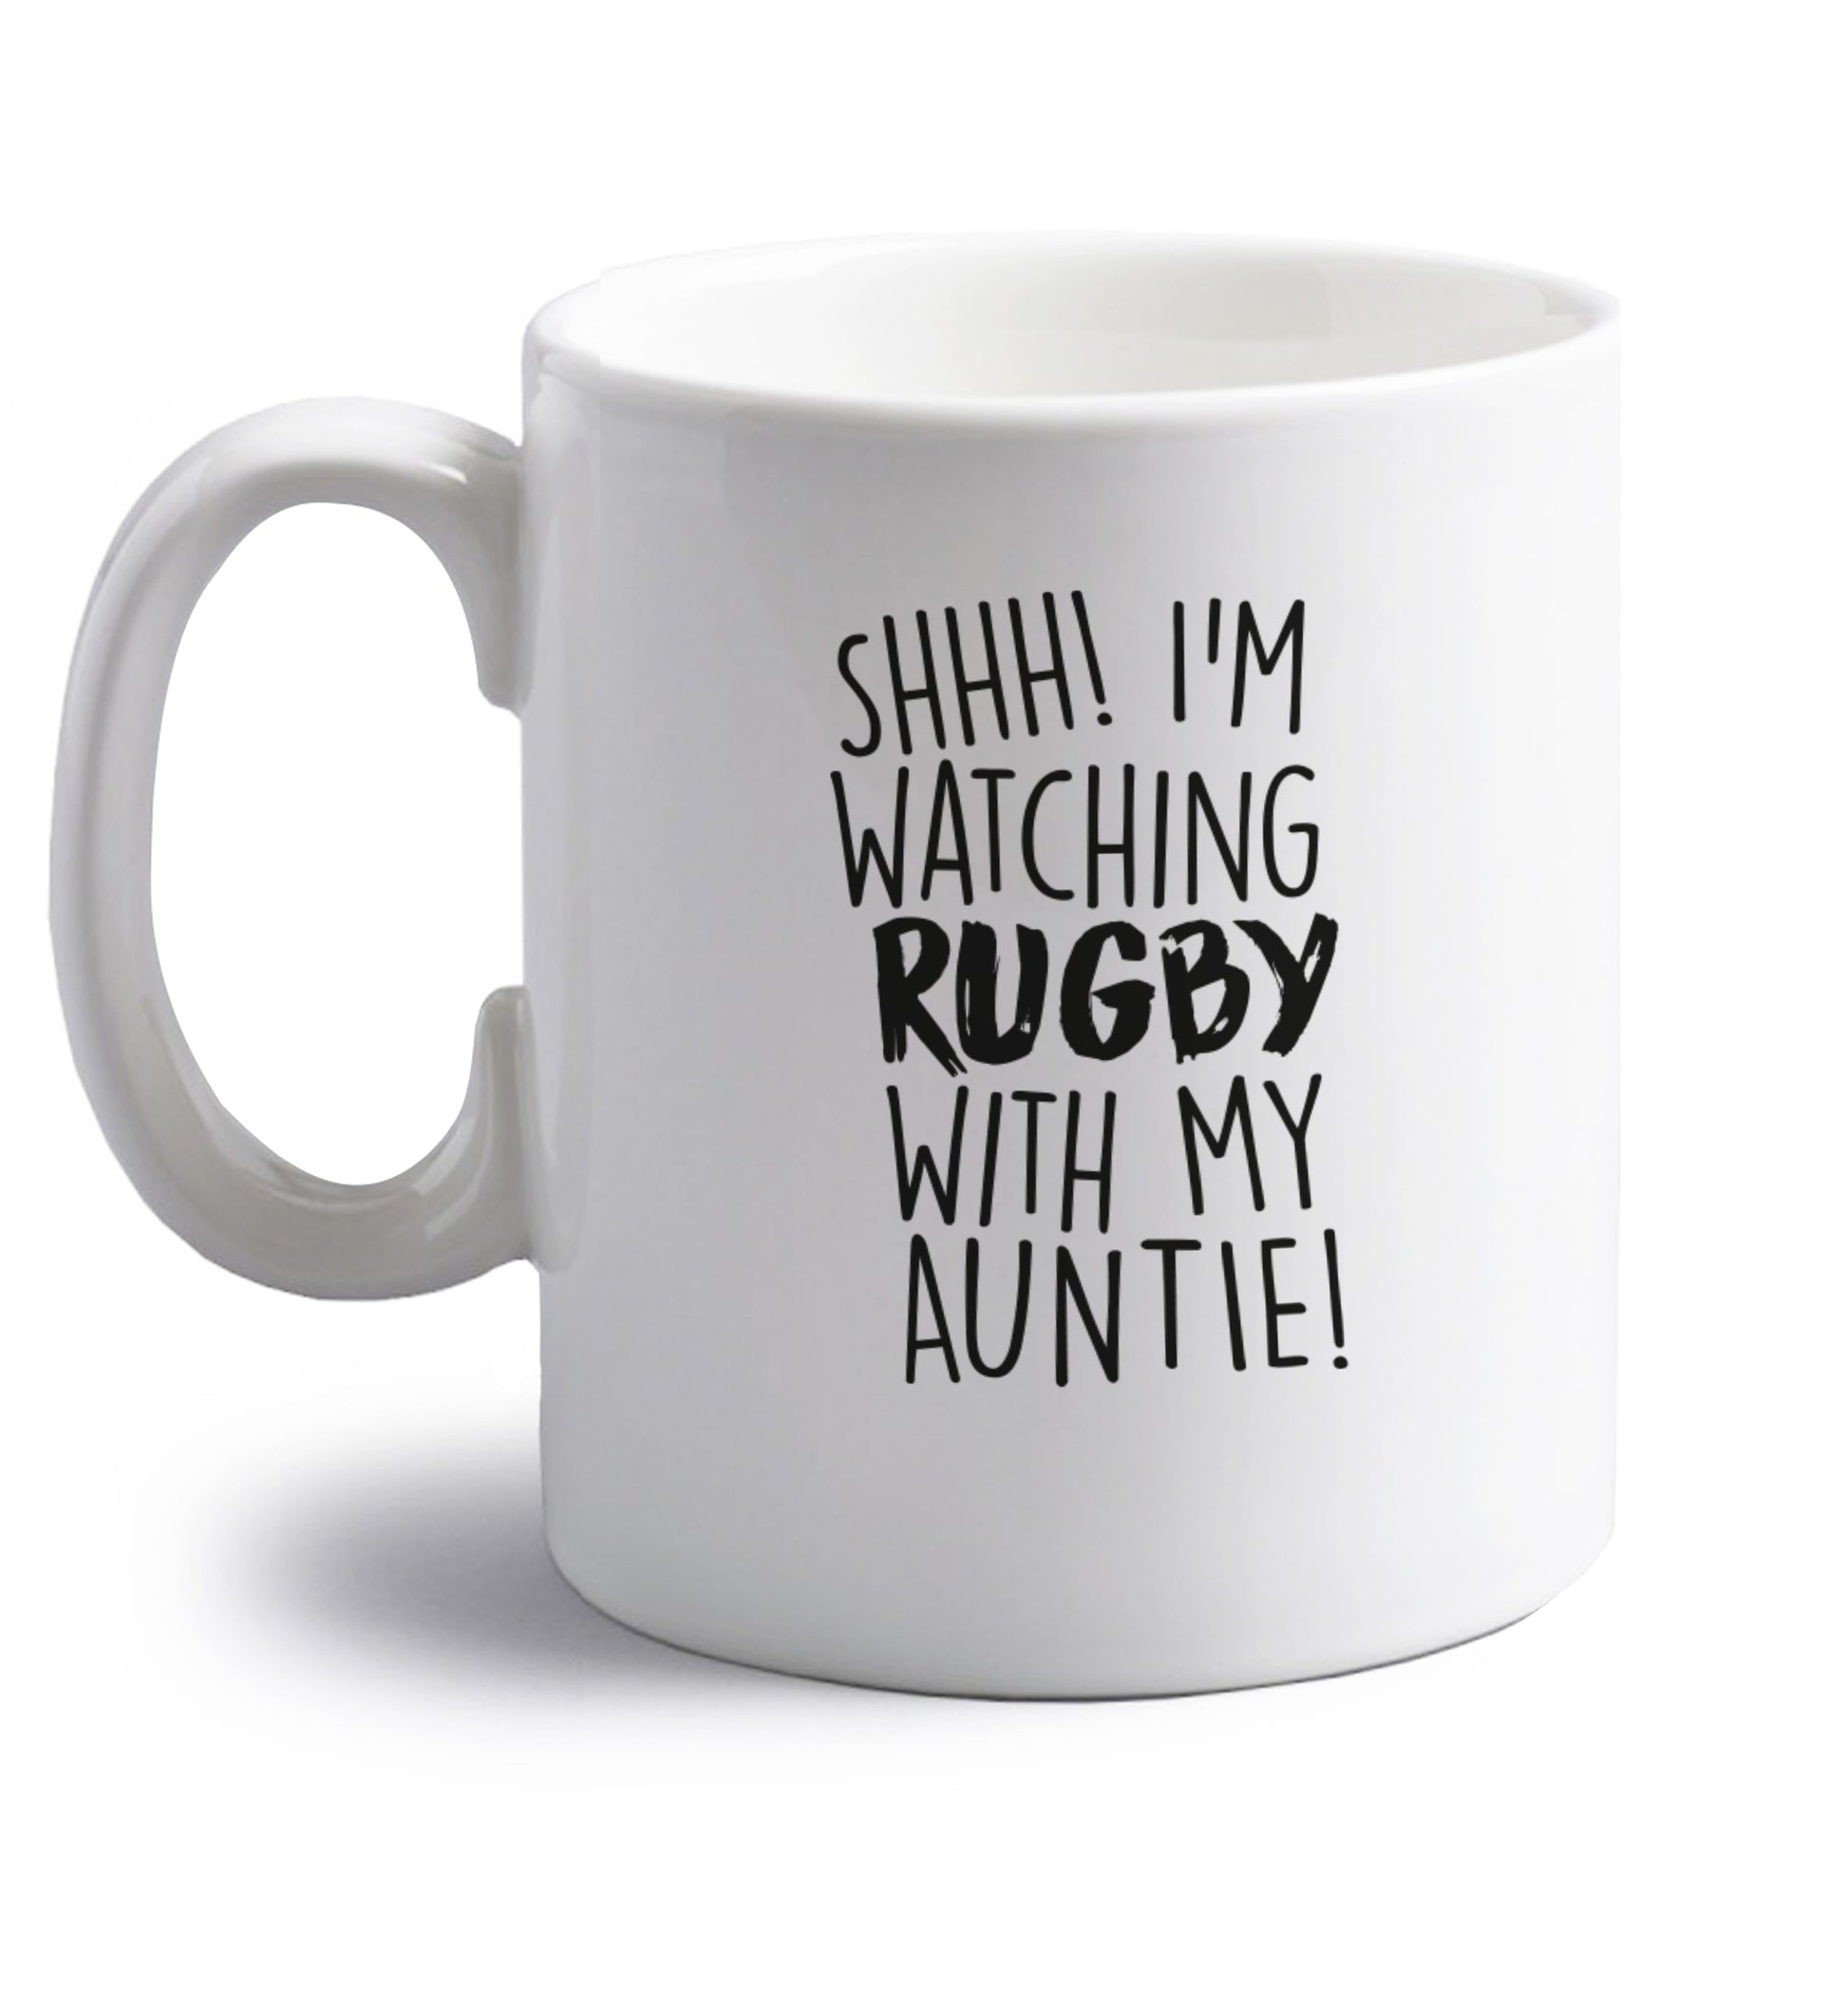 Shhh I'm watchin rugby with my auntie right handed white ceramic mug 